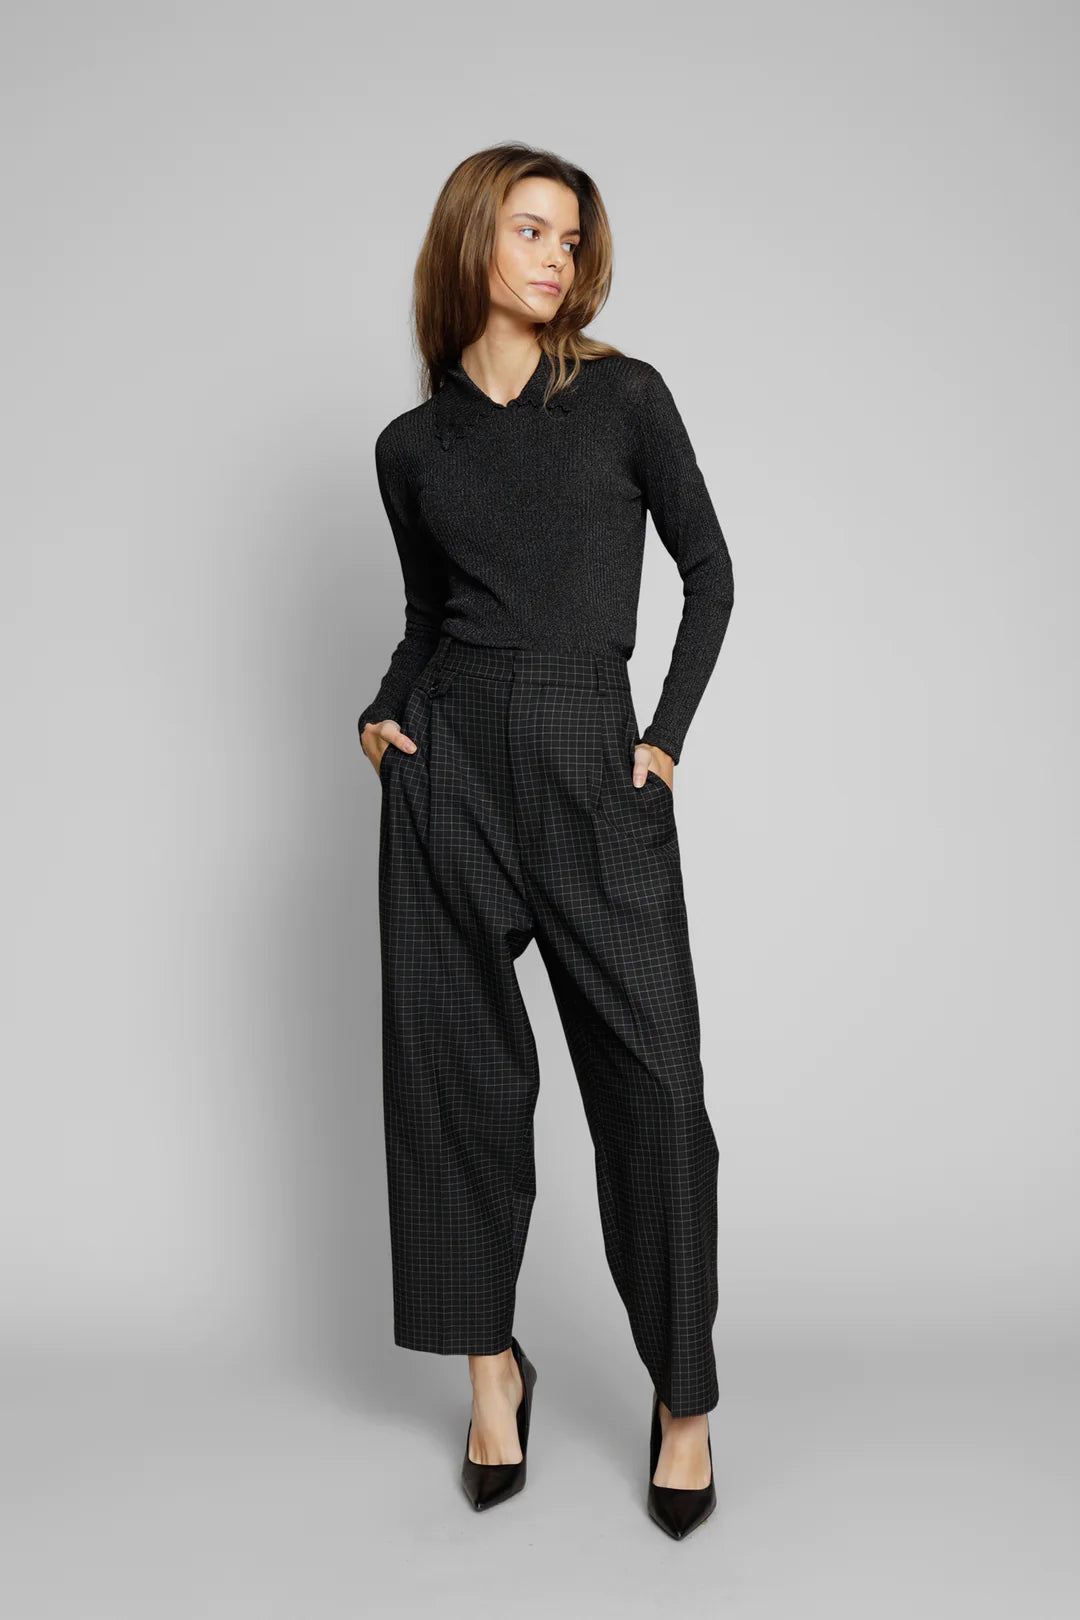 Edie Trousers by Munthe